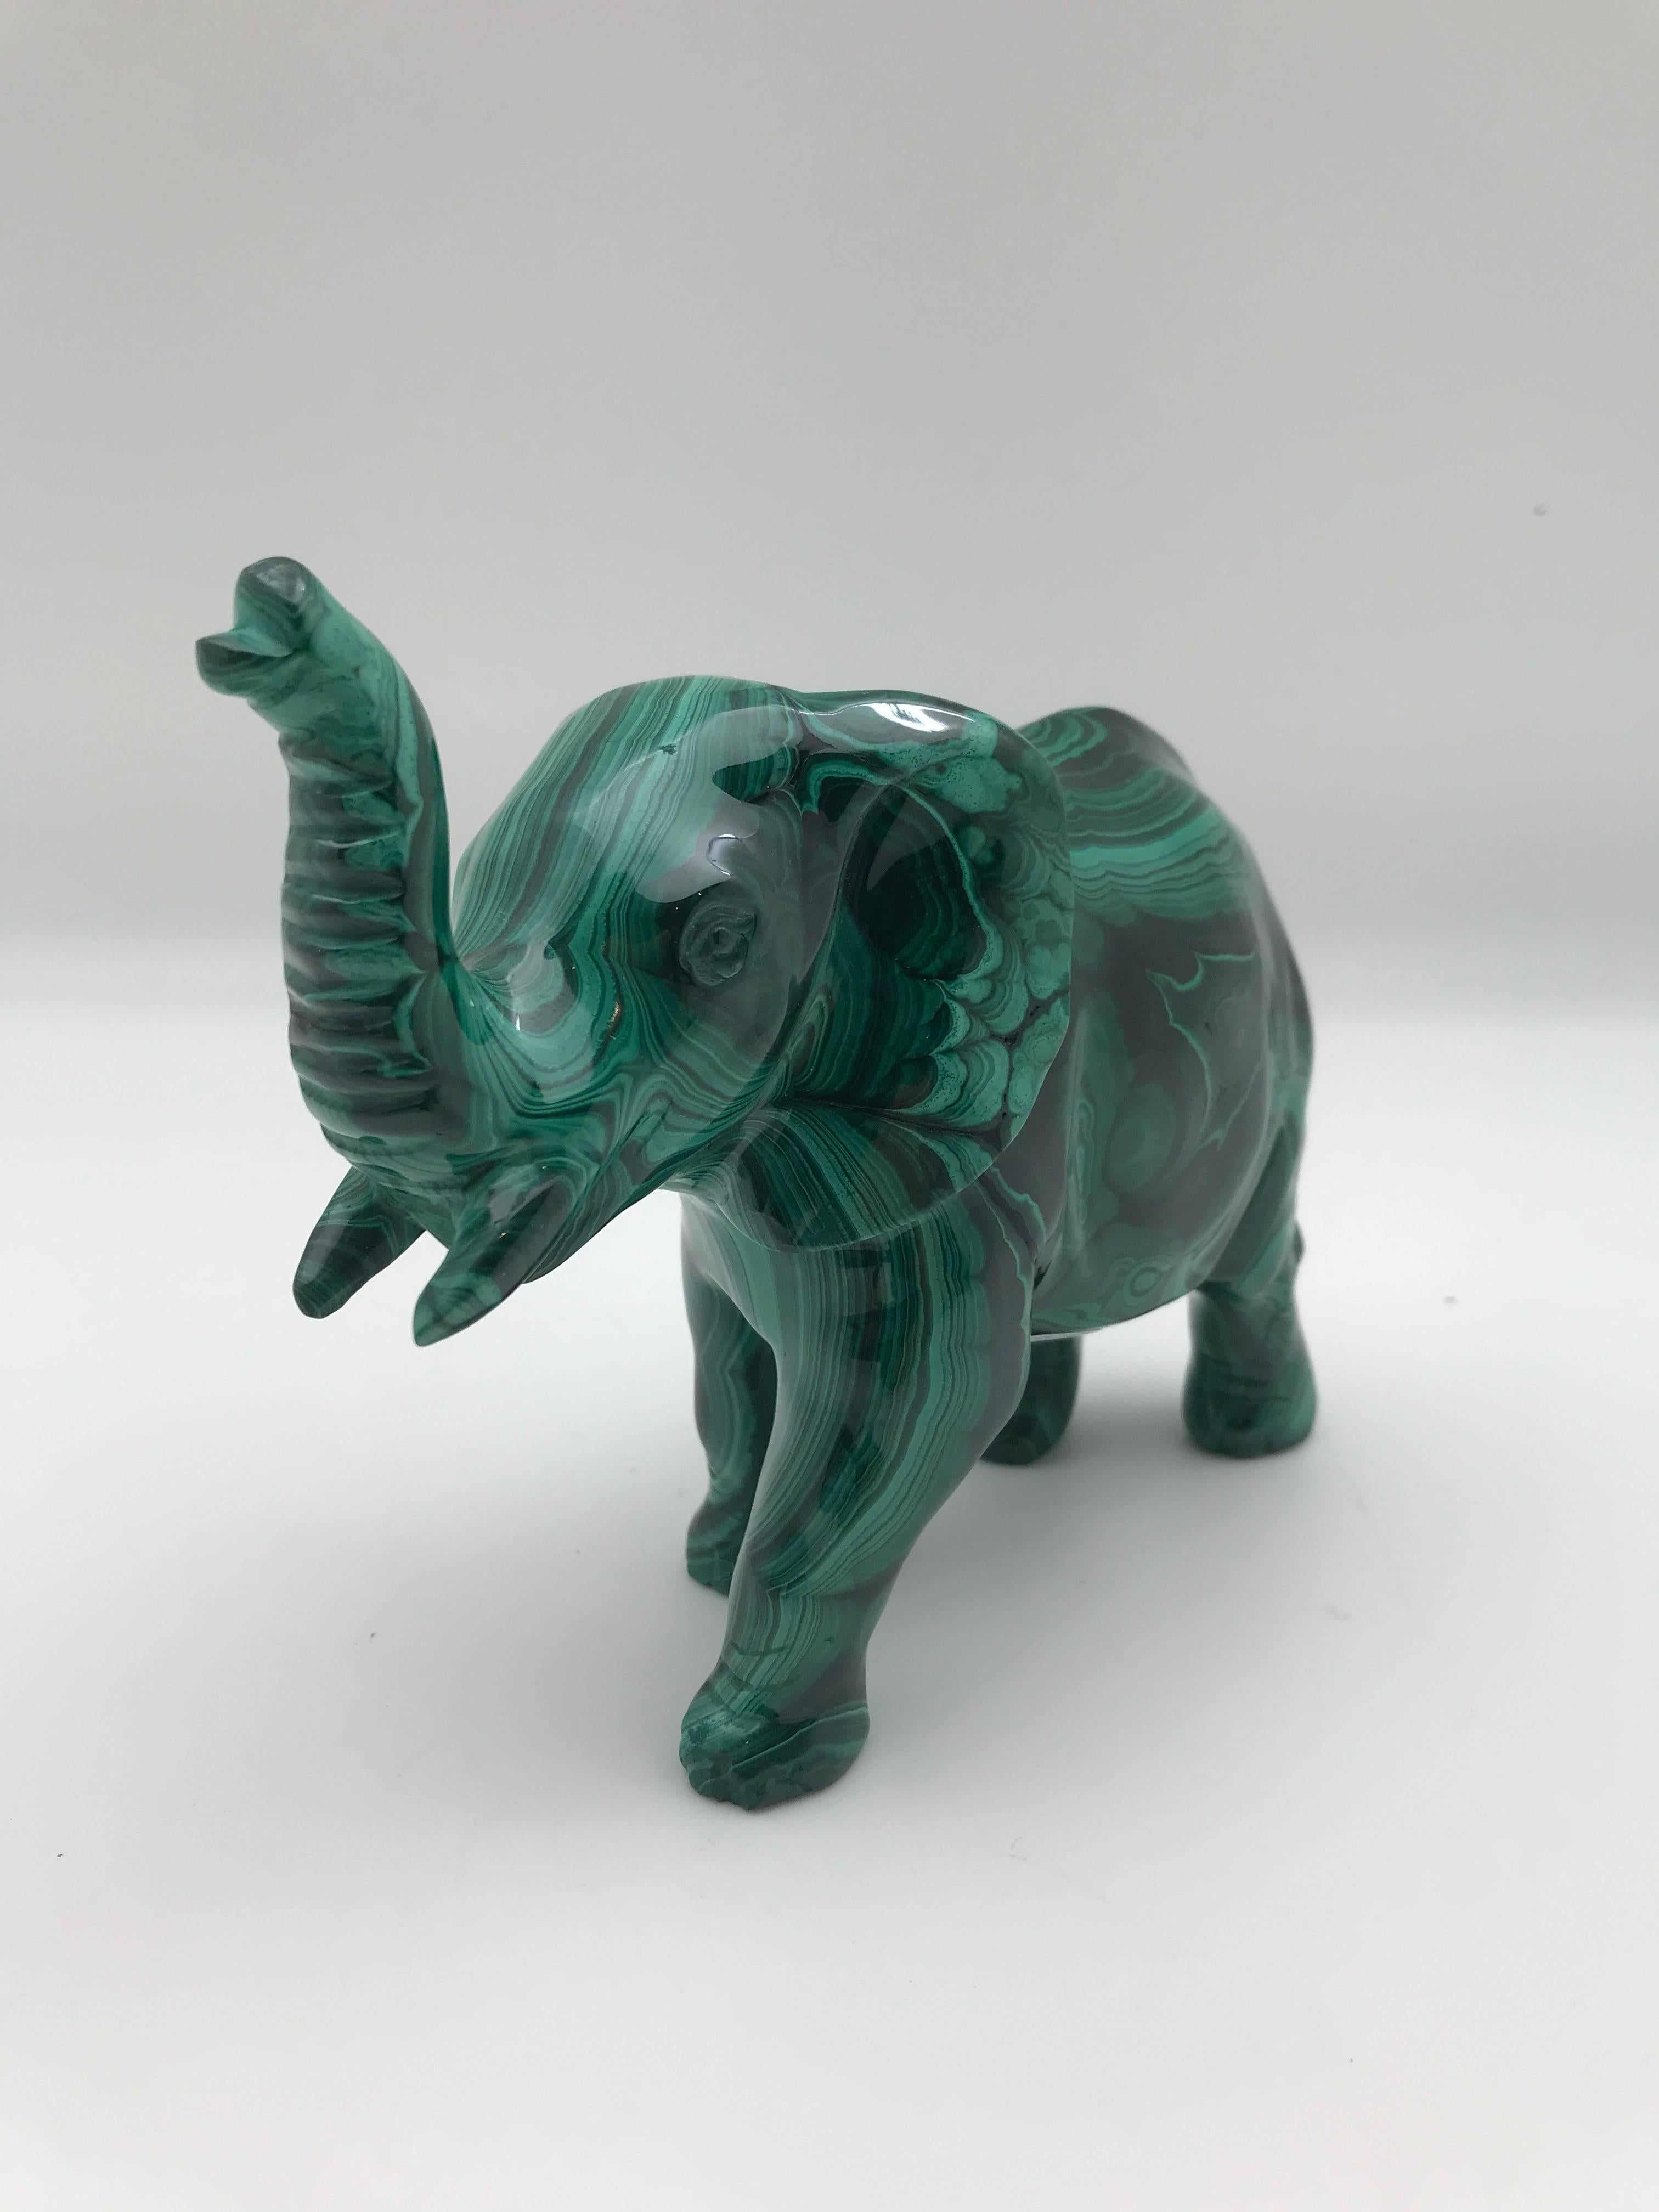 Very large carved Malachite elephant with its trunk up- to bring good luck. This piece was hand-carved in India out of one solid piece of malachite from the Congo.